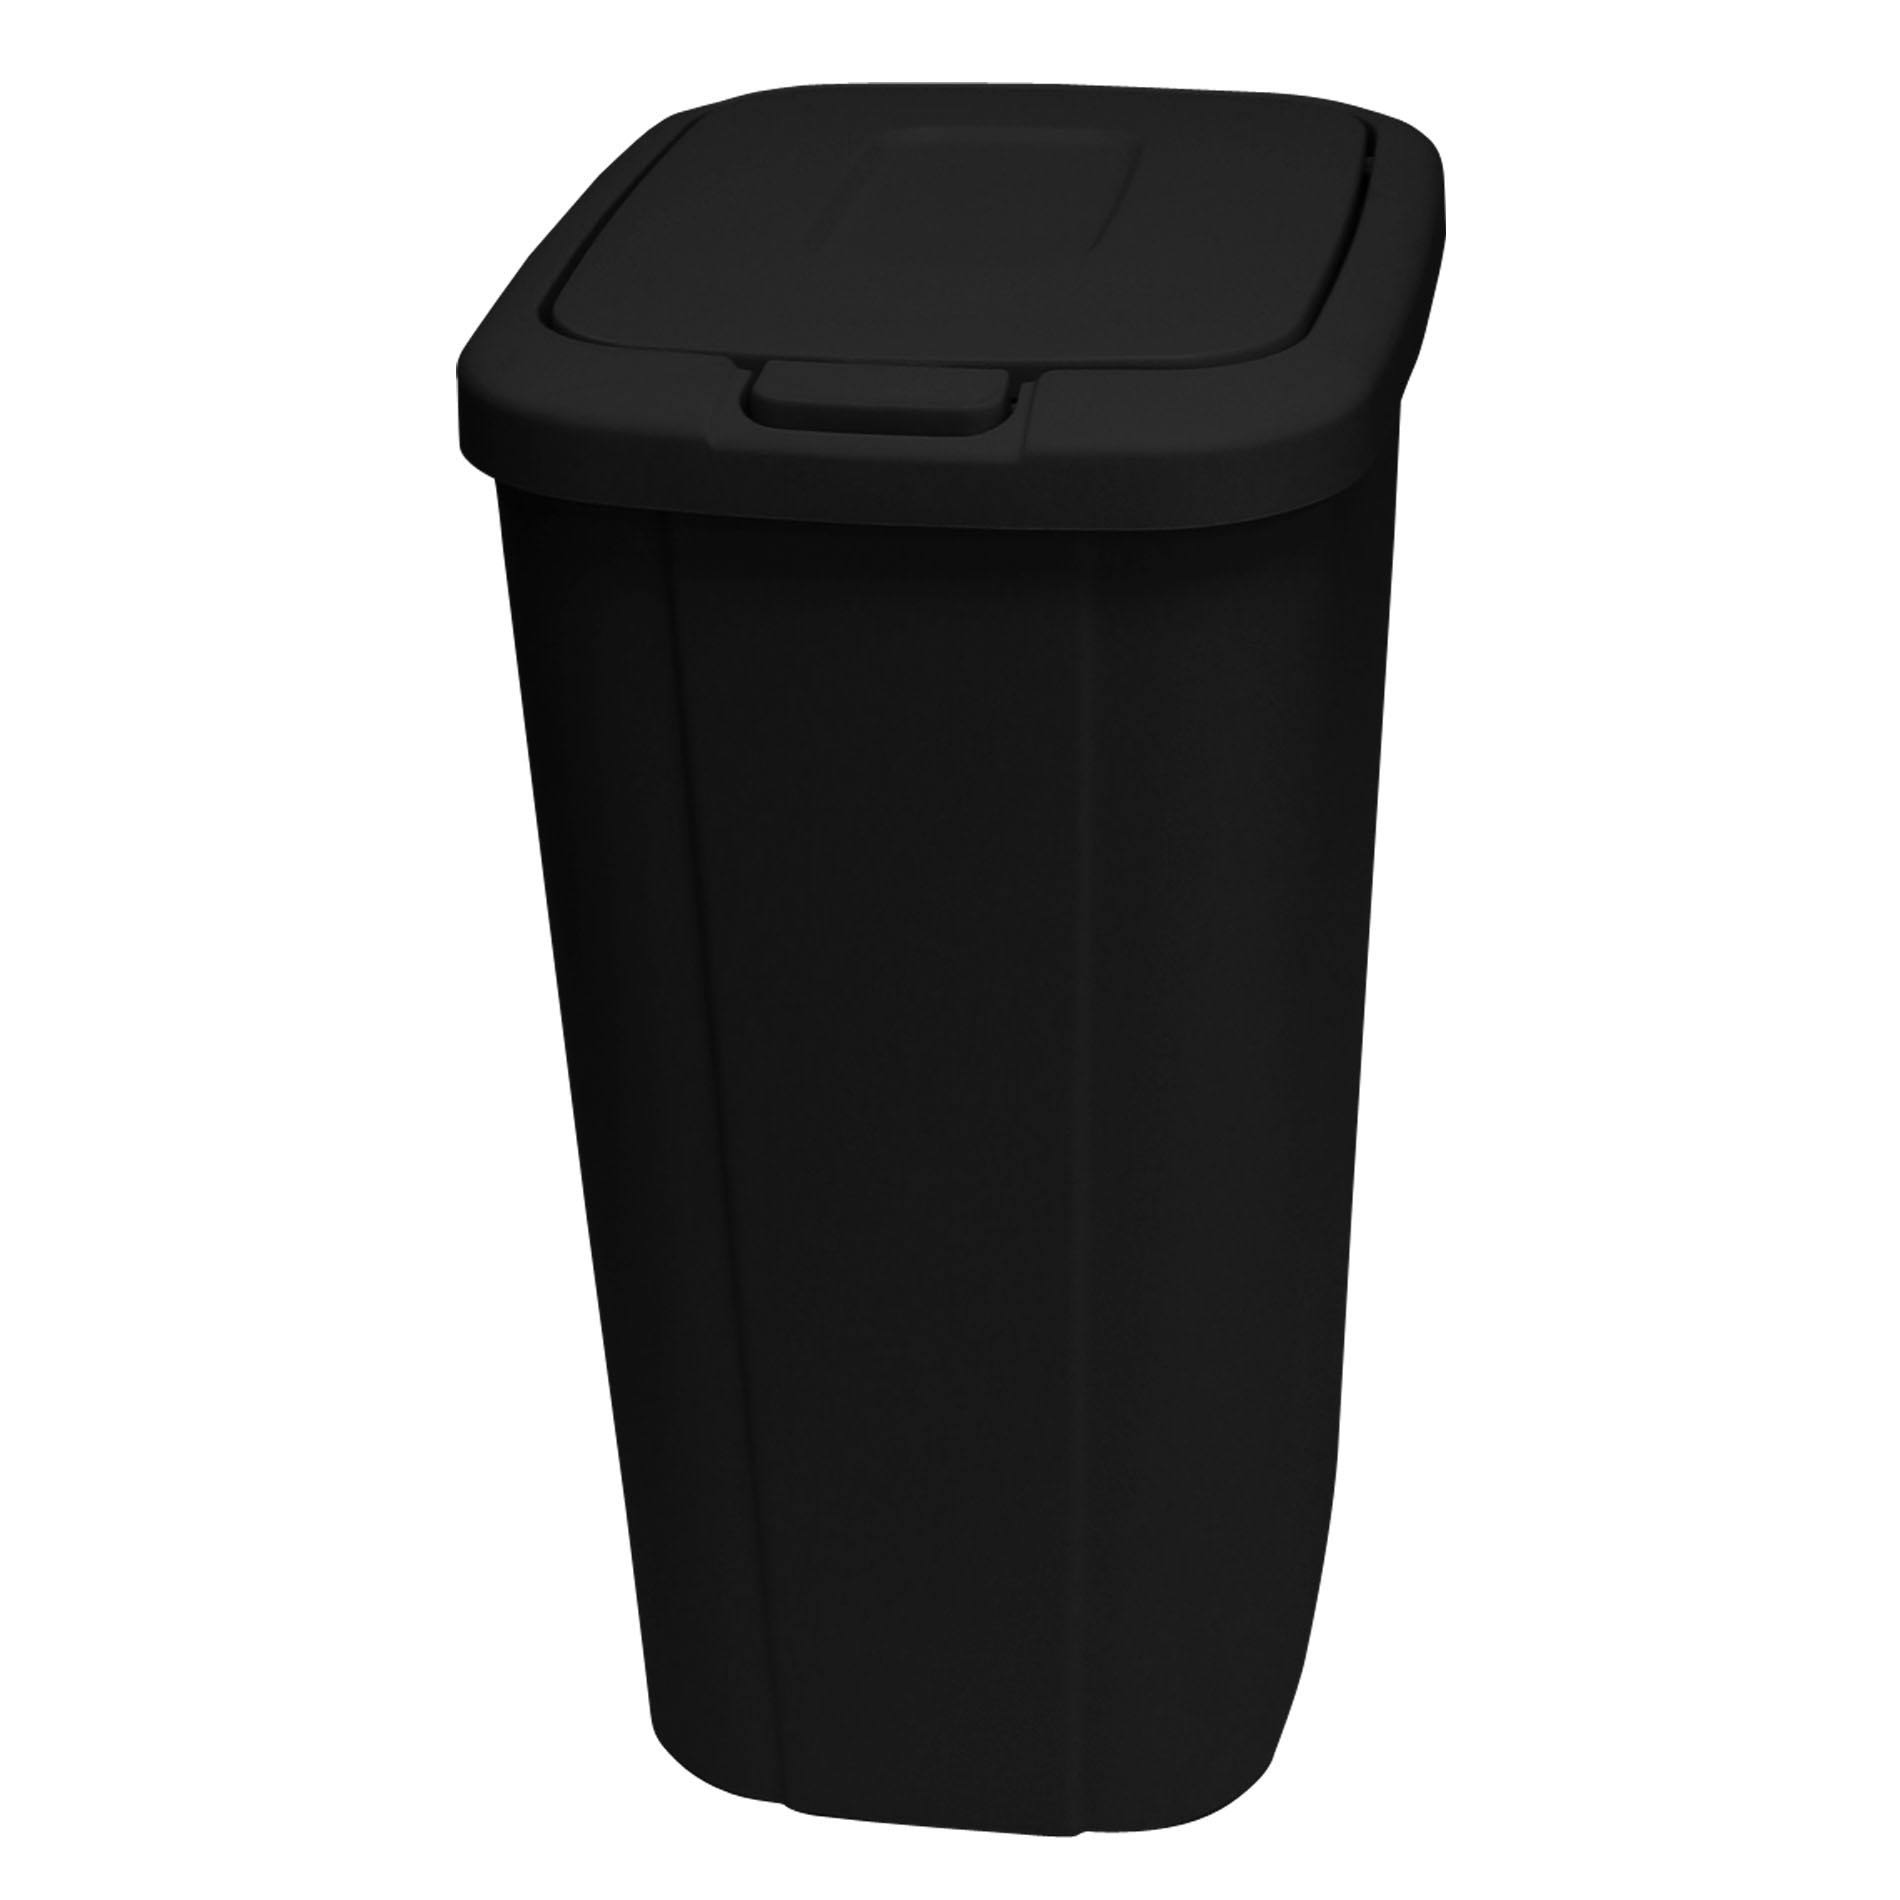 Hefty Touch-Lid 13.3-Gallon Trash Can - Black